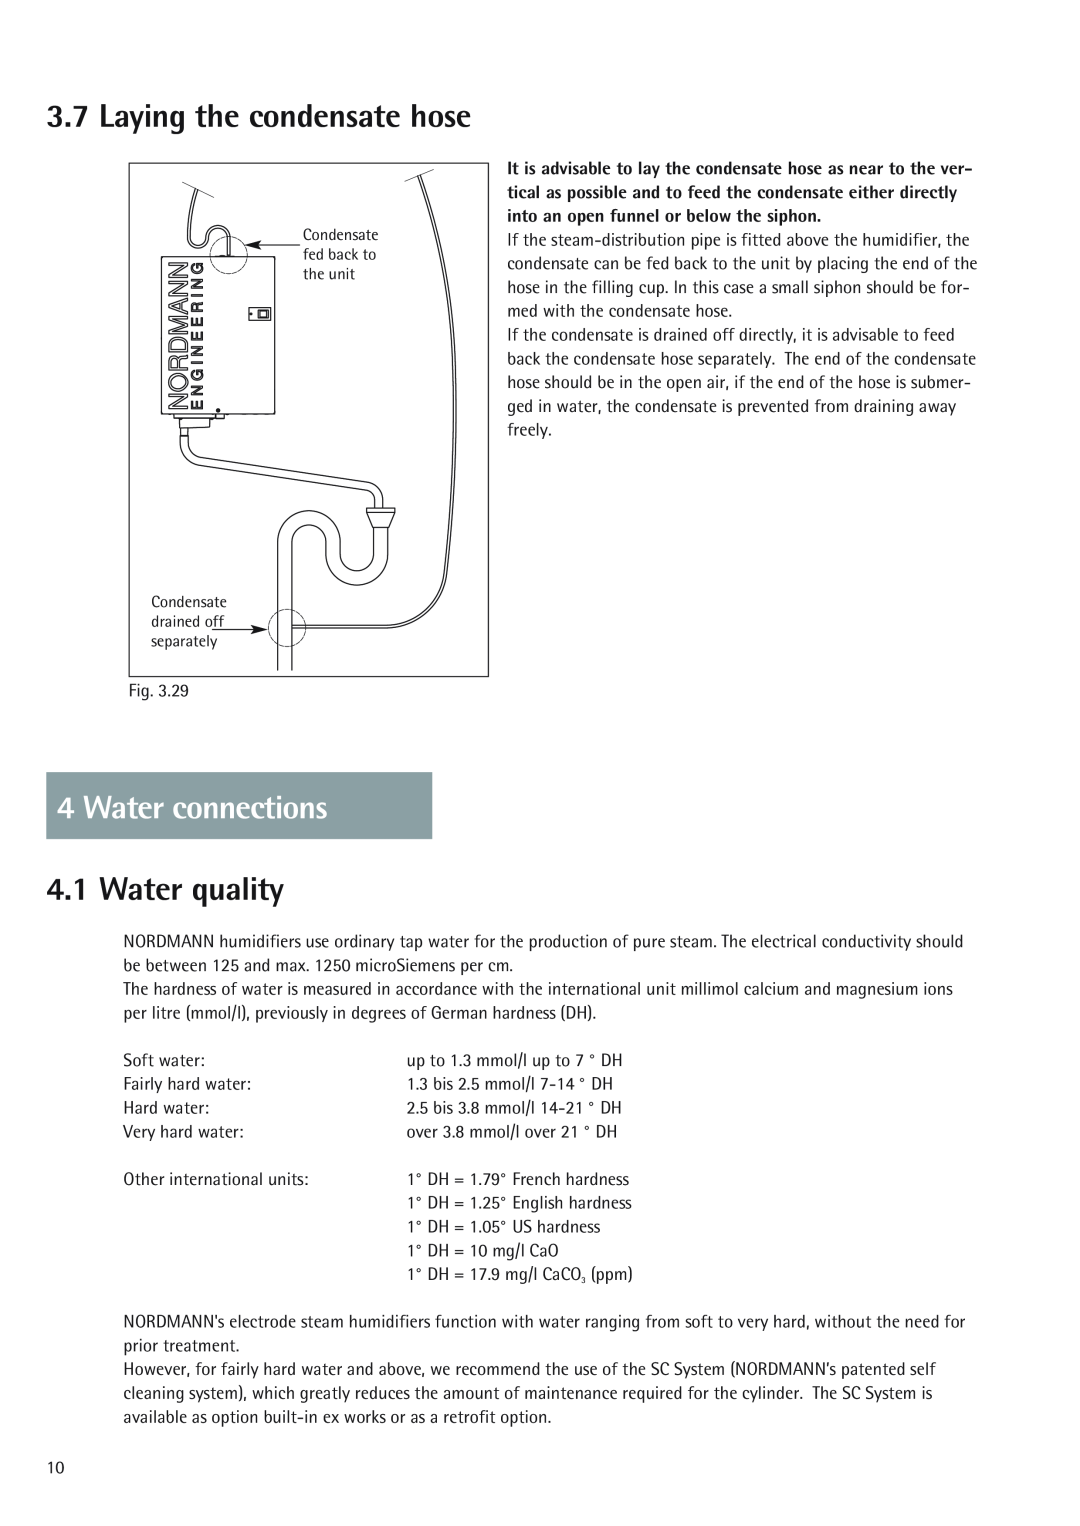 Nordmende 2401935EN0801 manual Water connections, Water quality, Laying the condensate hose 